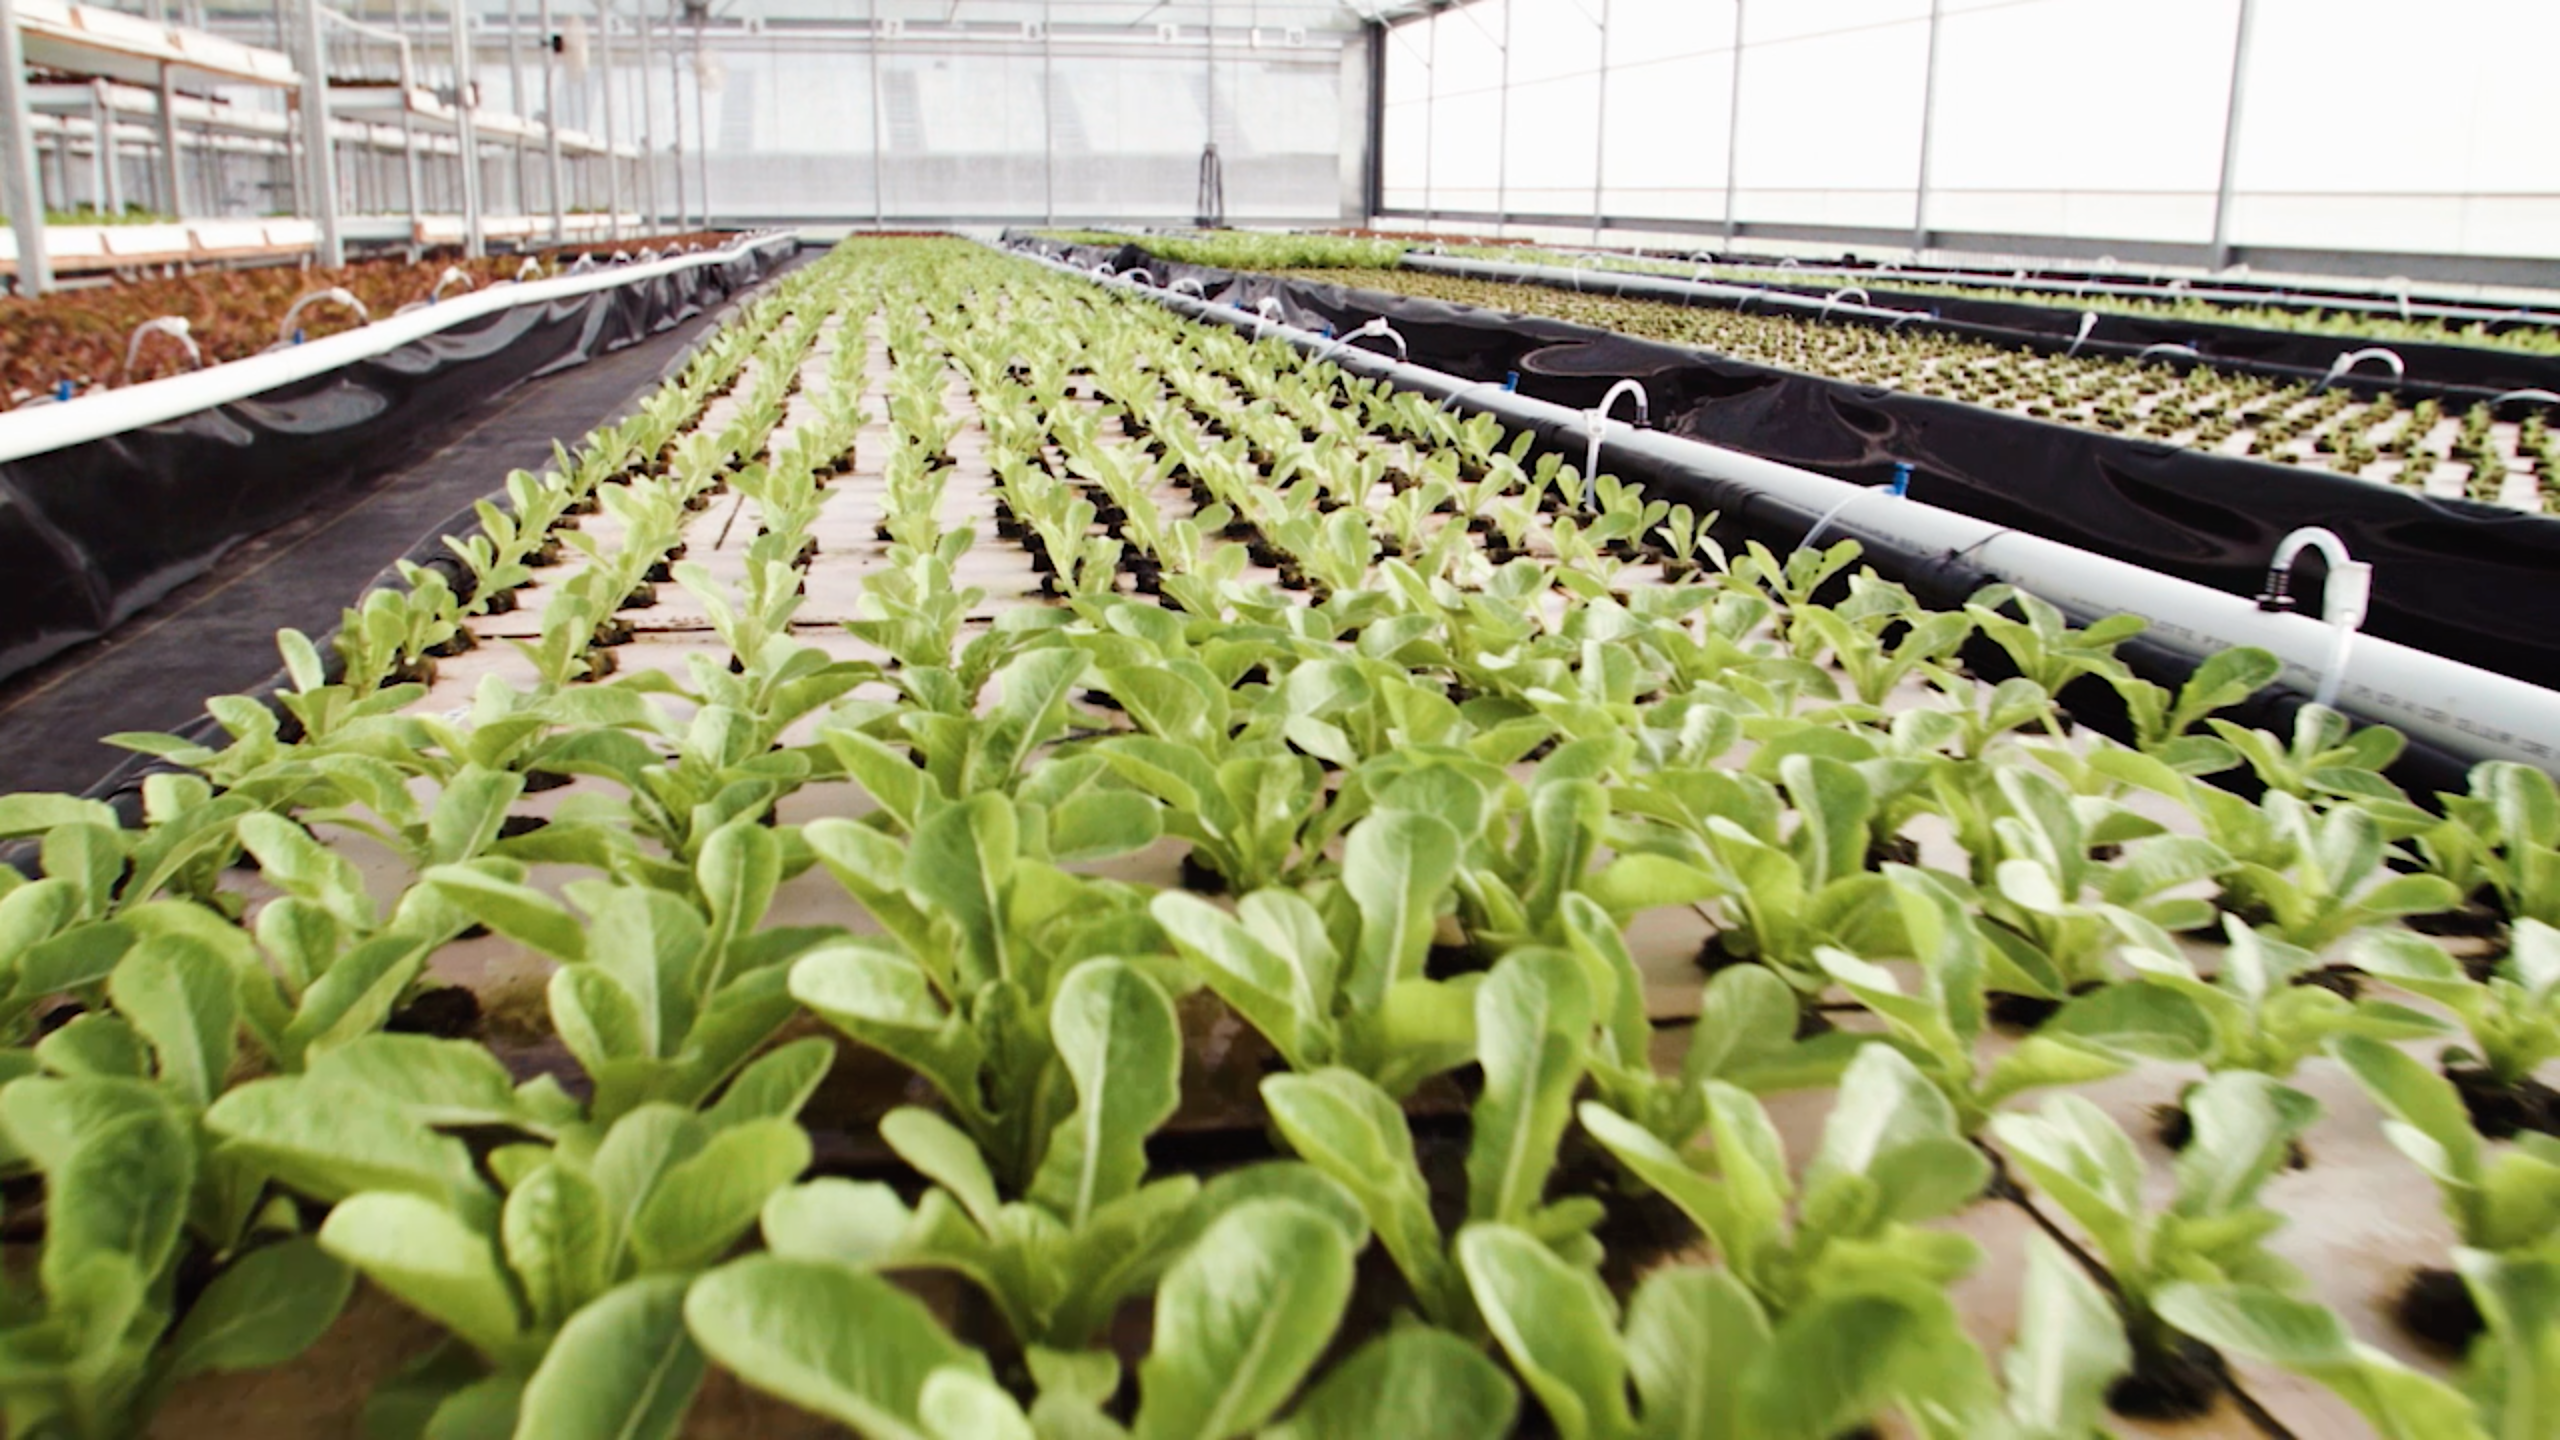 A greenhouse with rows of lettuce growing in it.